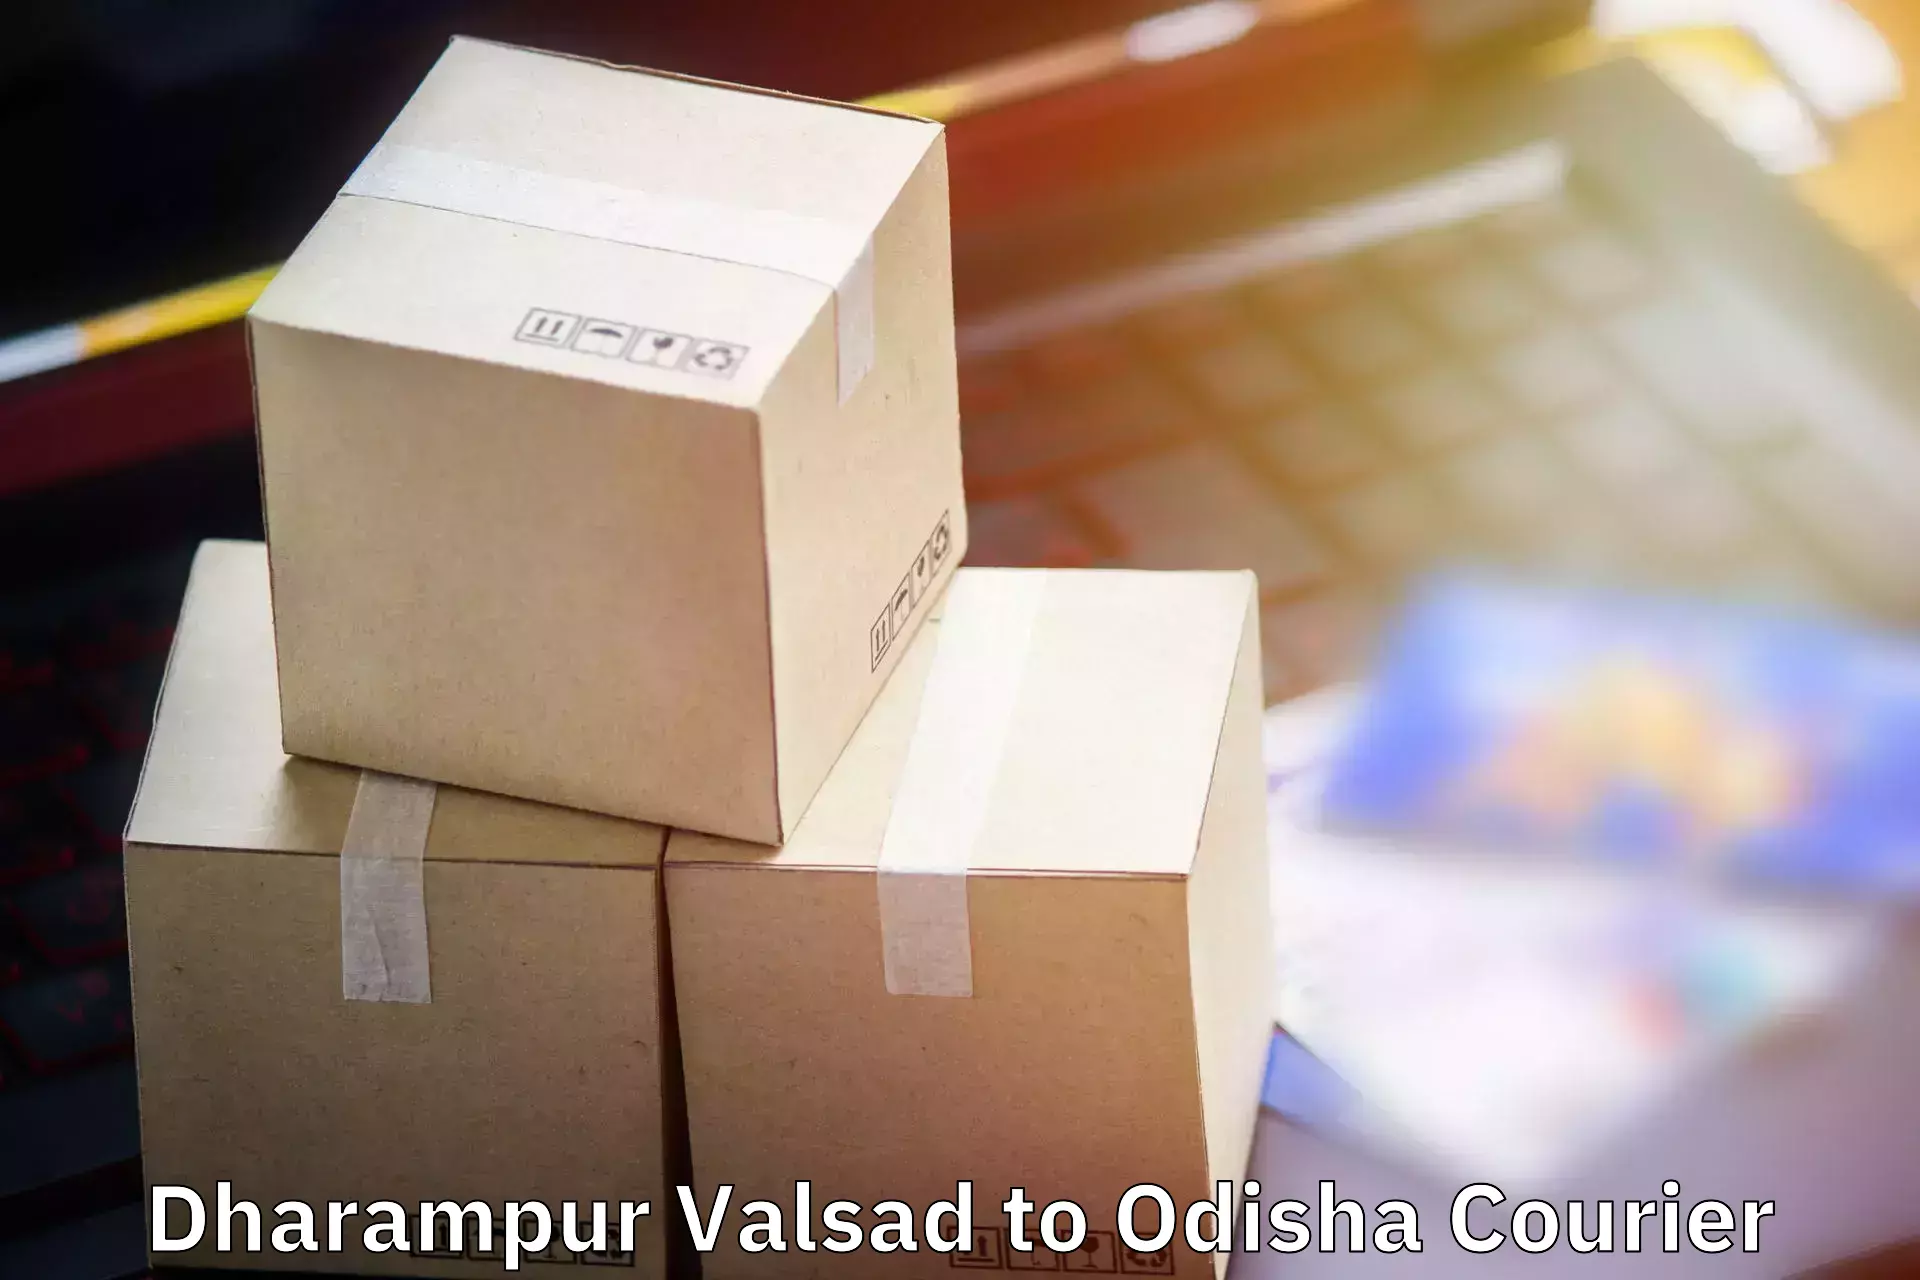 Electronic items luggage shipping Dharampur Valsad to Muribahal